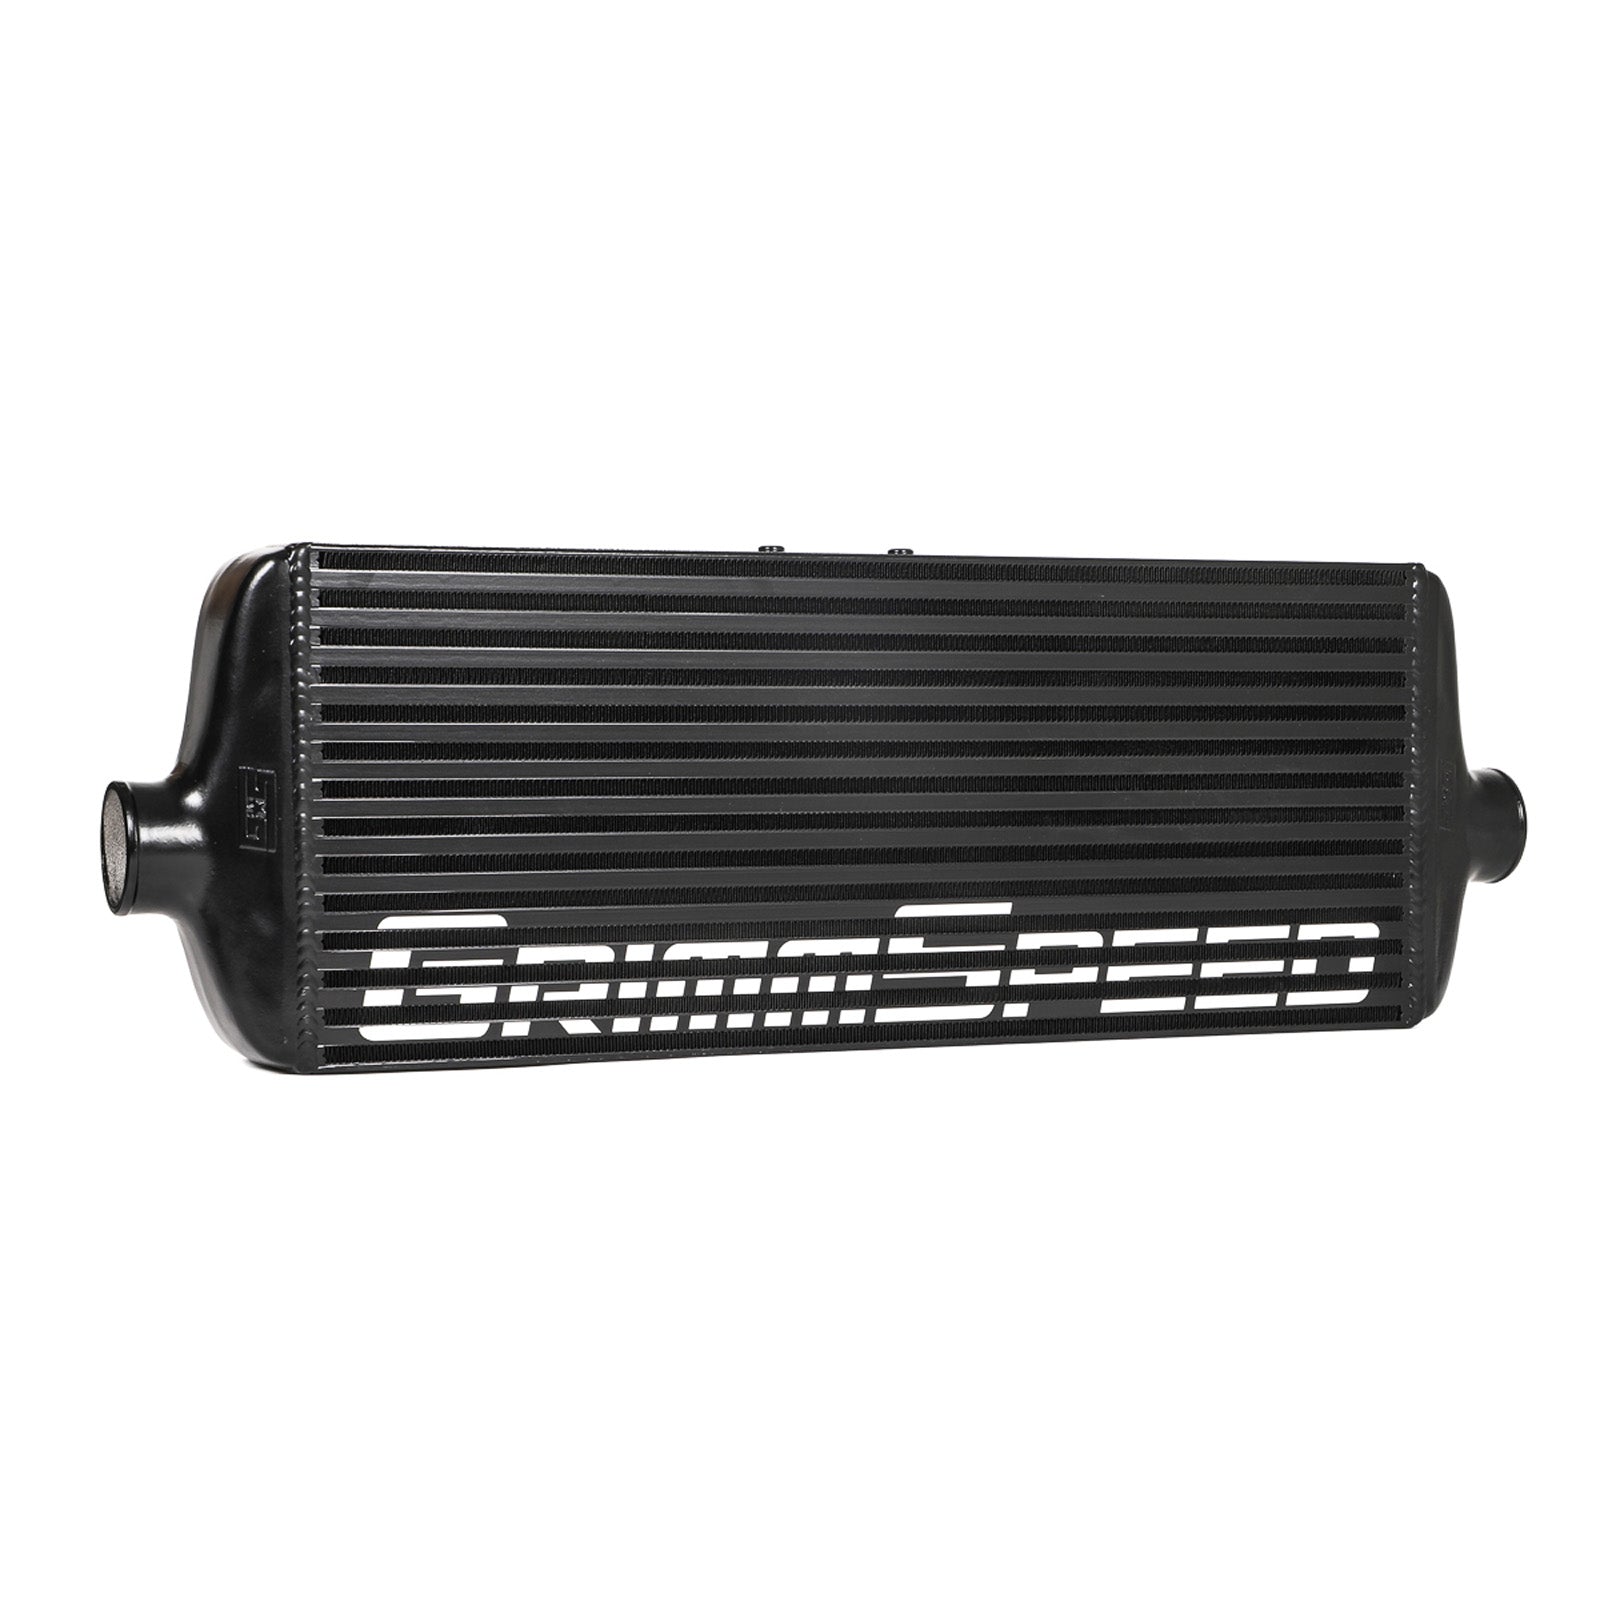 GrimmSpeed Front Mount Intercooler Kit - Black Core with Black Piping - 2015-21 Subaru WRX